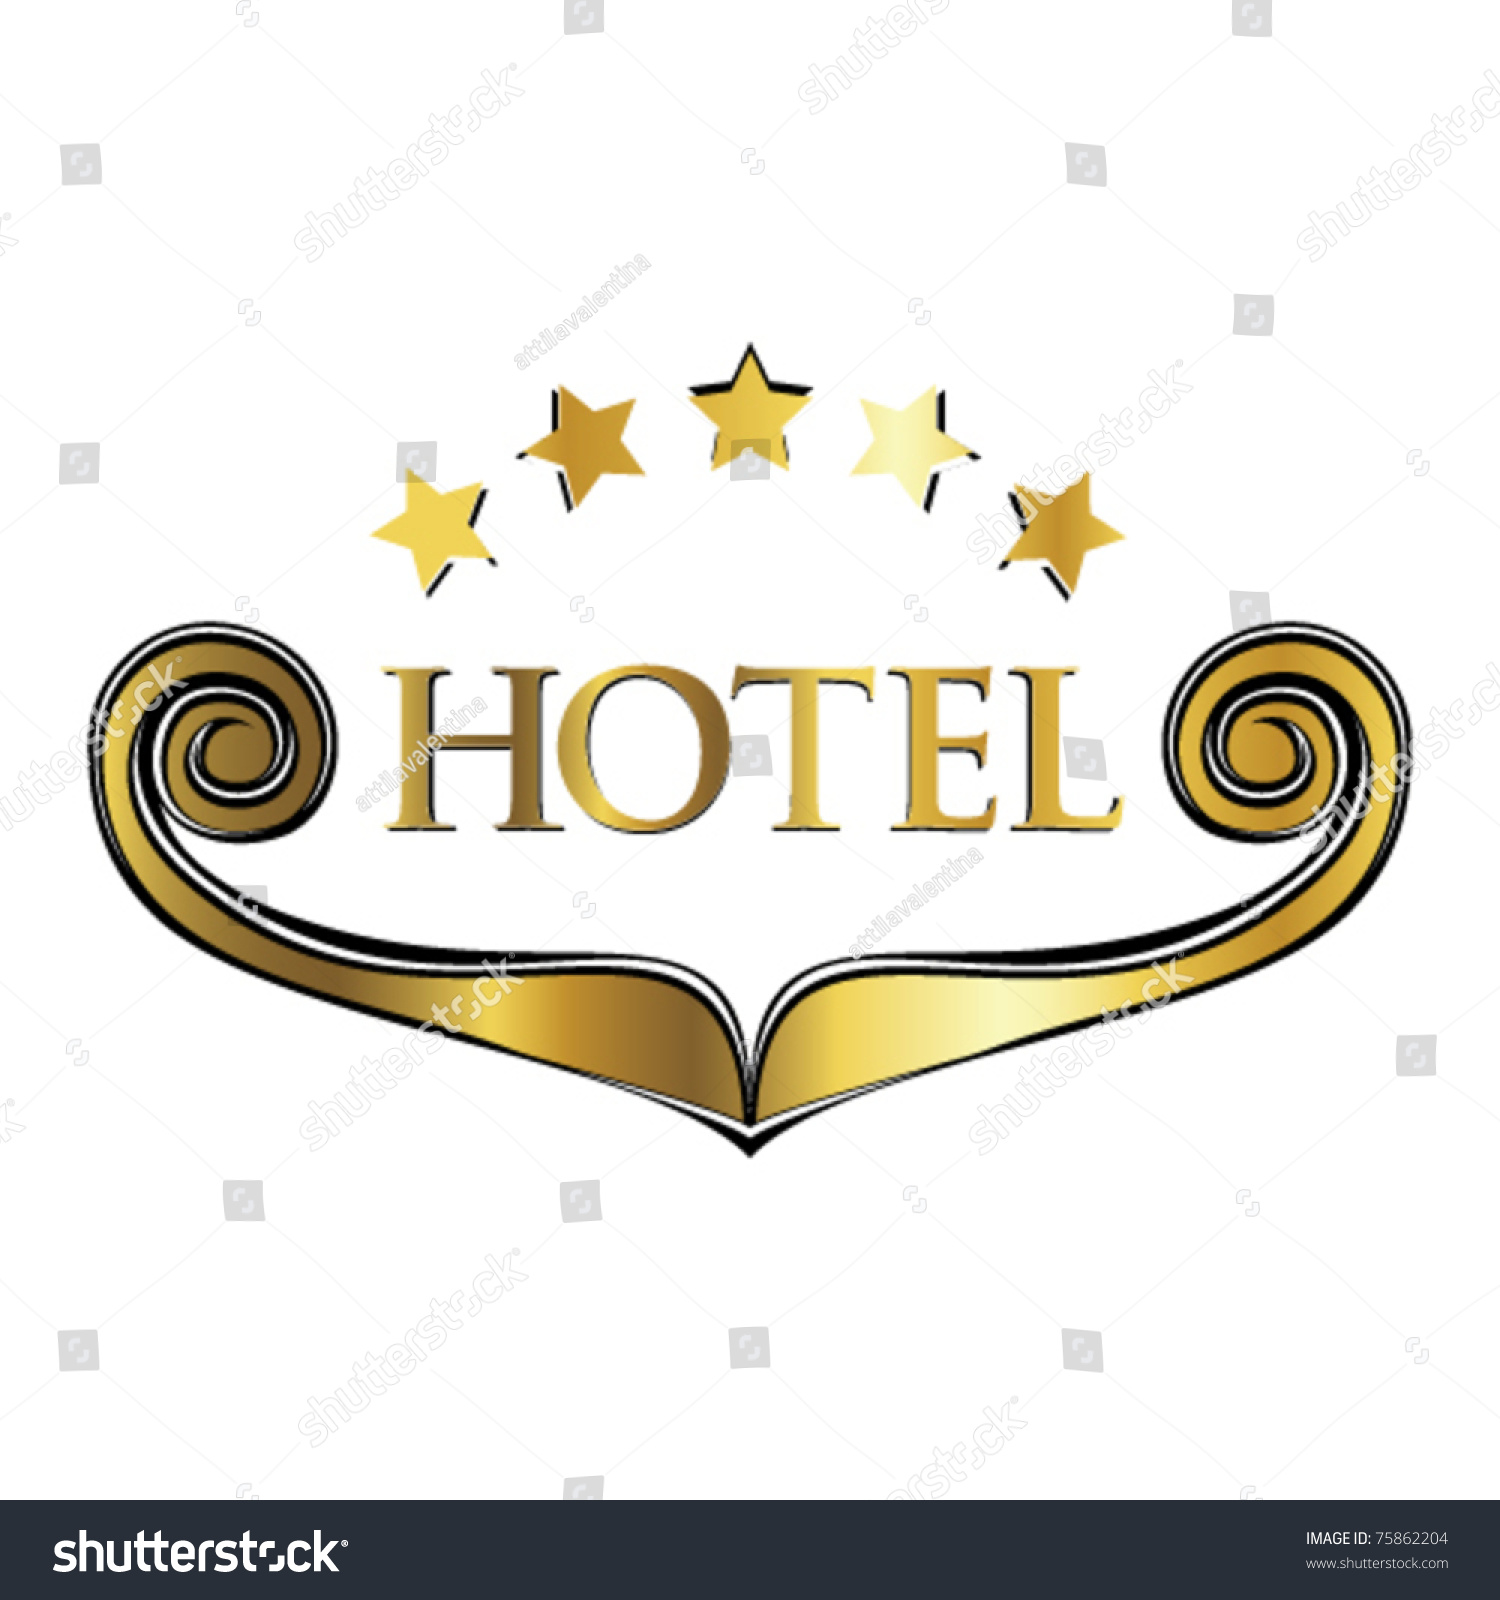 Hotel Emblem With 5 Star Stock Vector 75862204 : Shutterstock